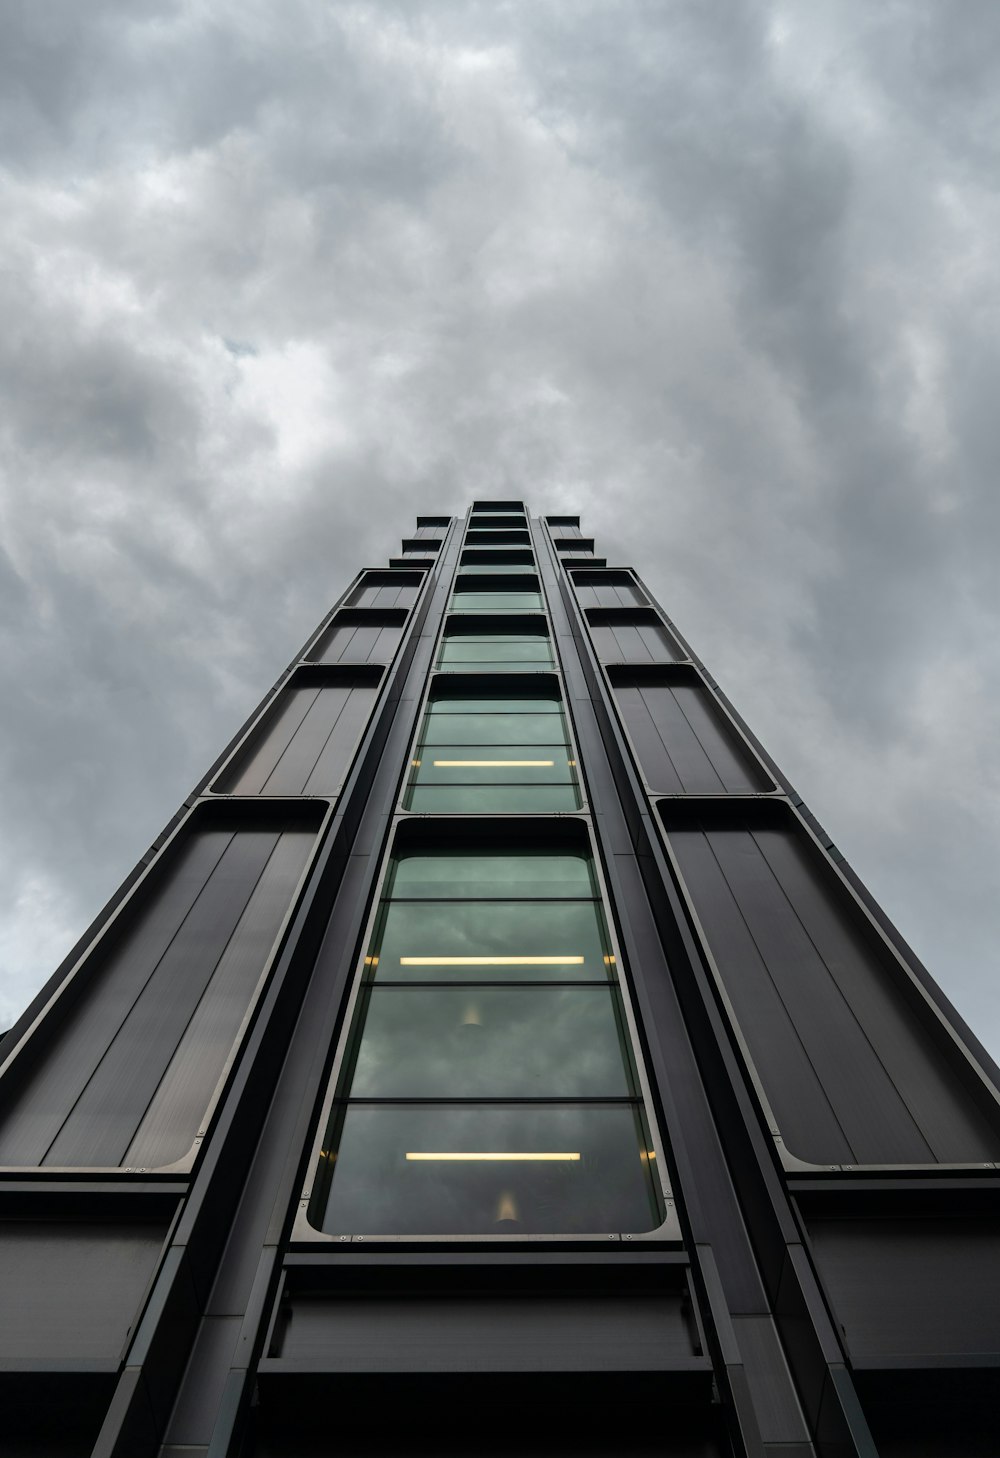 a tall building with a cloudy sky